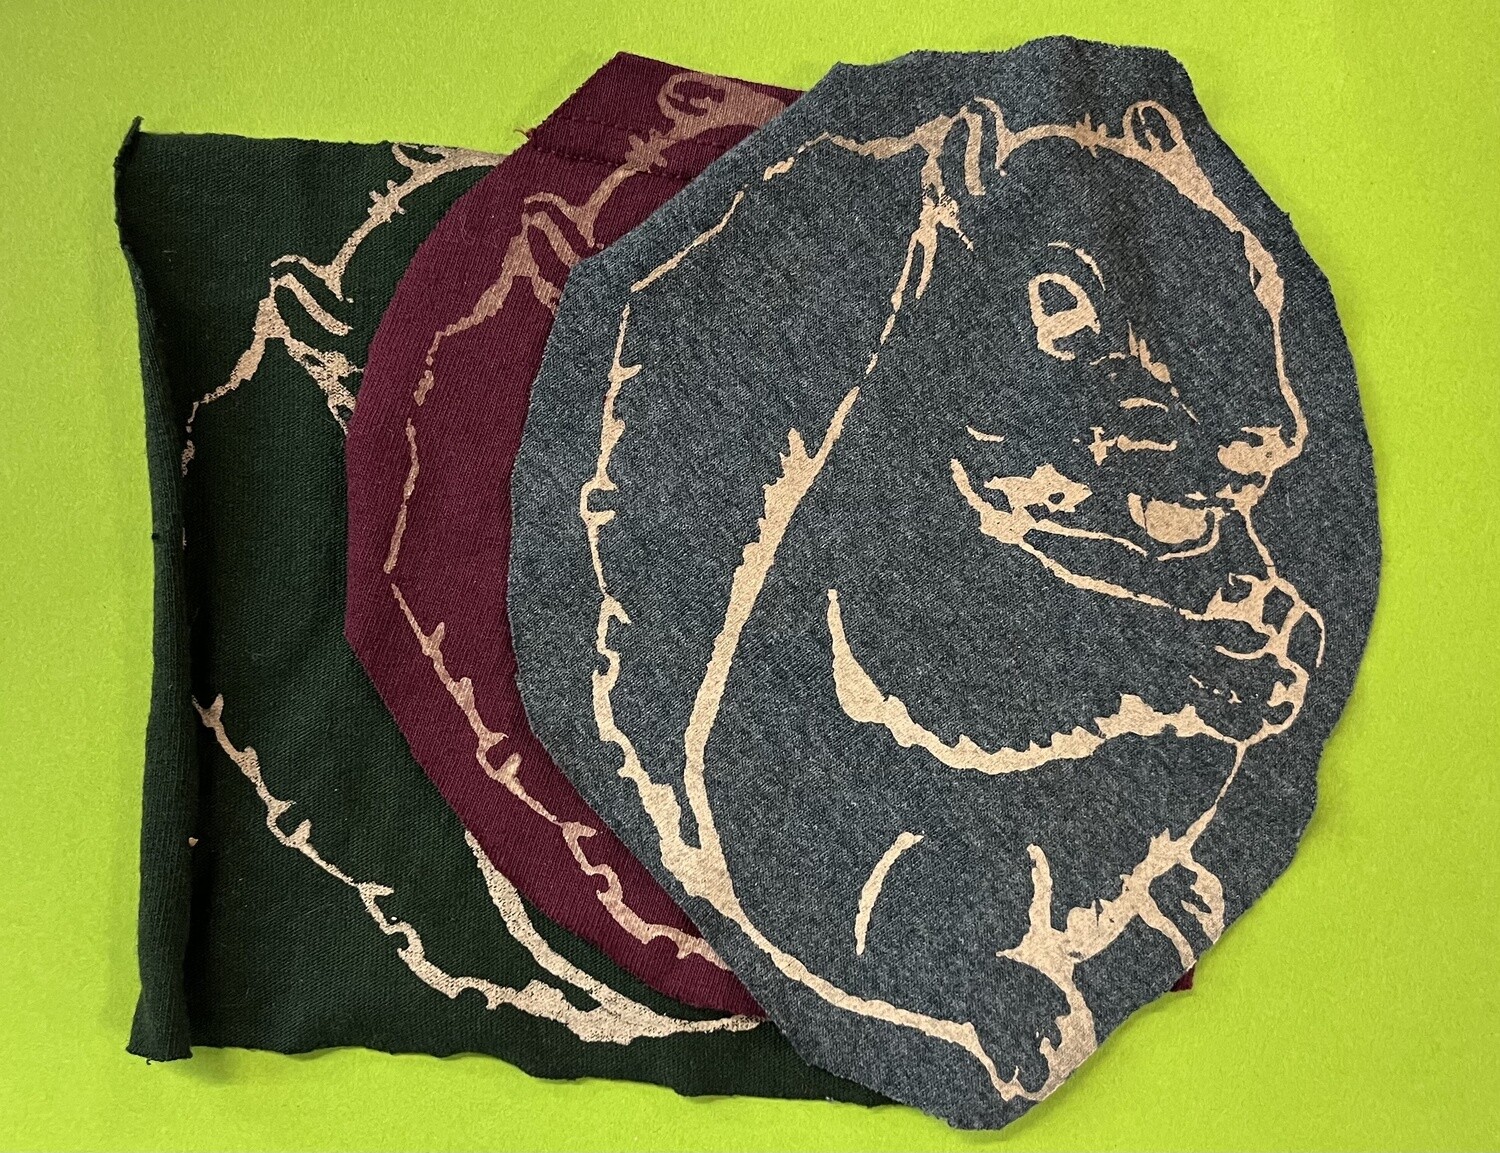 SQUIRREL - Block Printed Patch by Push/Pull